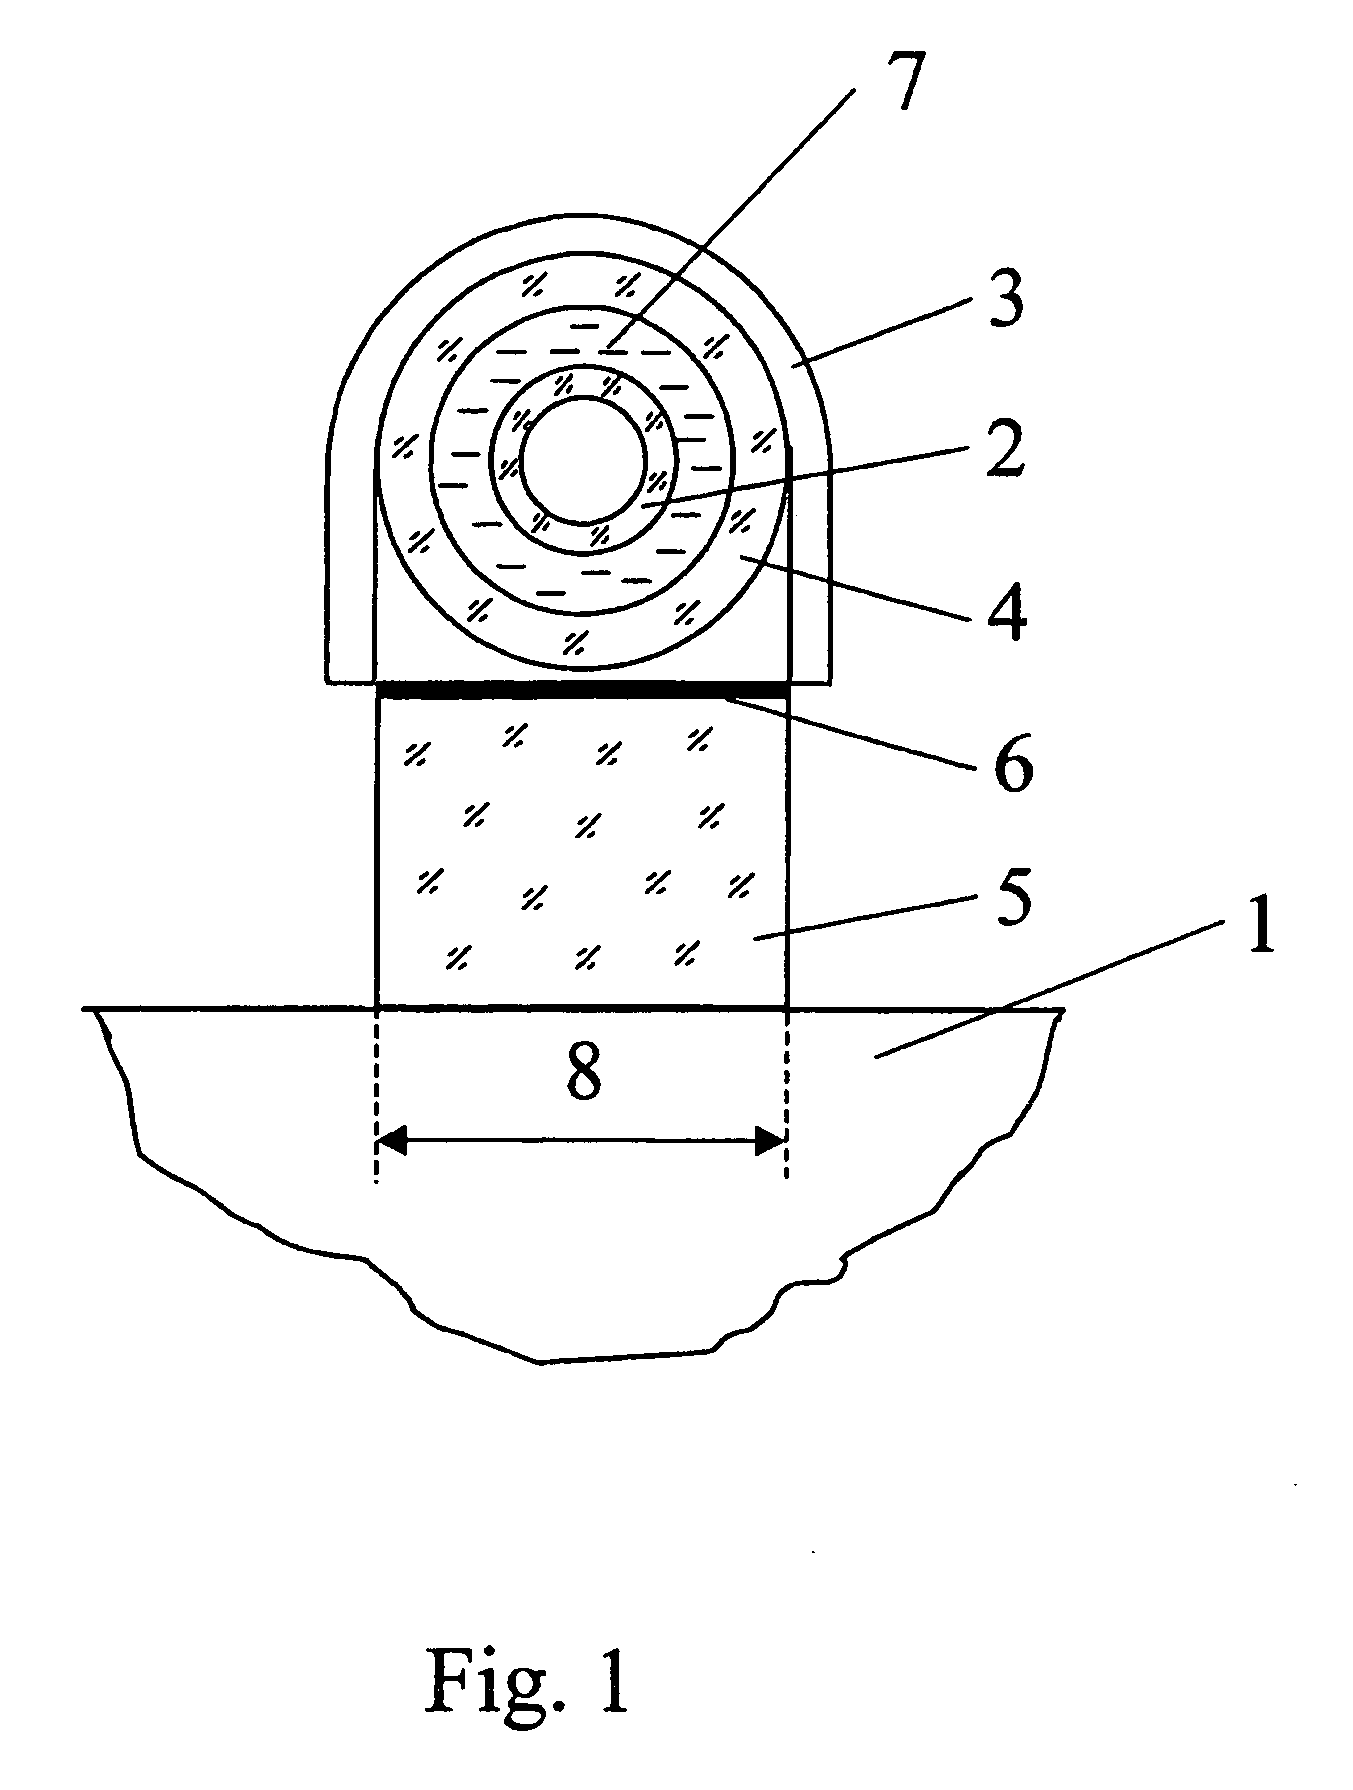 Apparatus and method for photocosmetic and photodermatological treatment